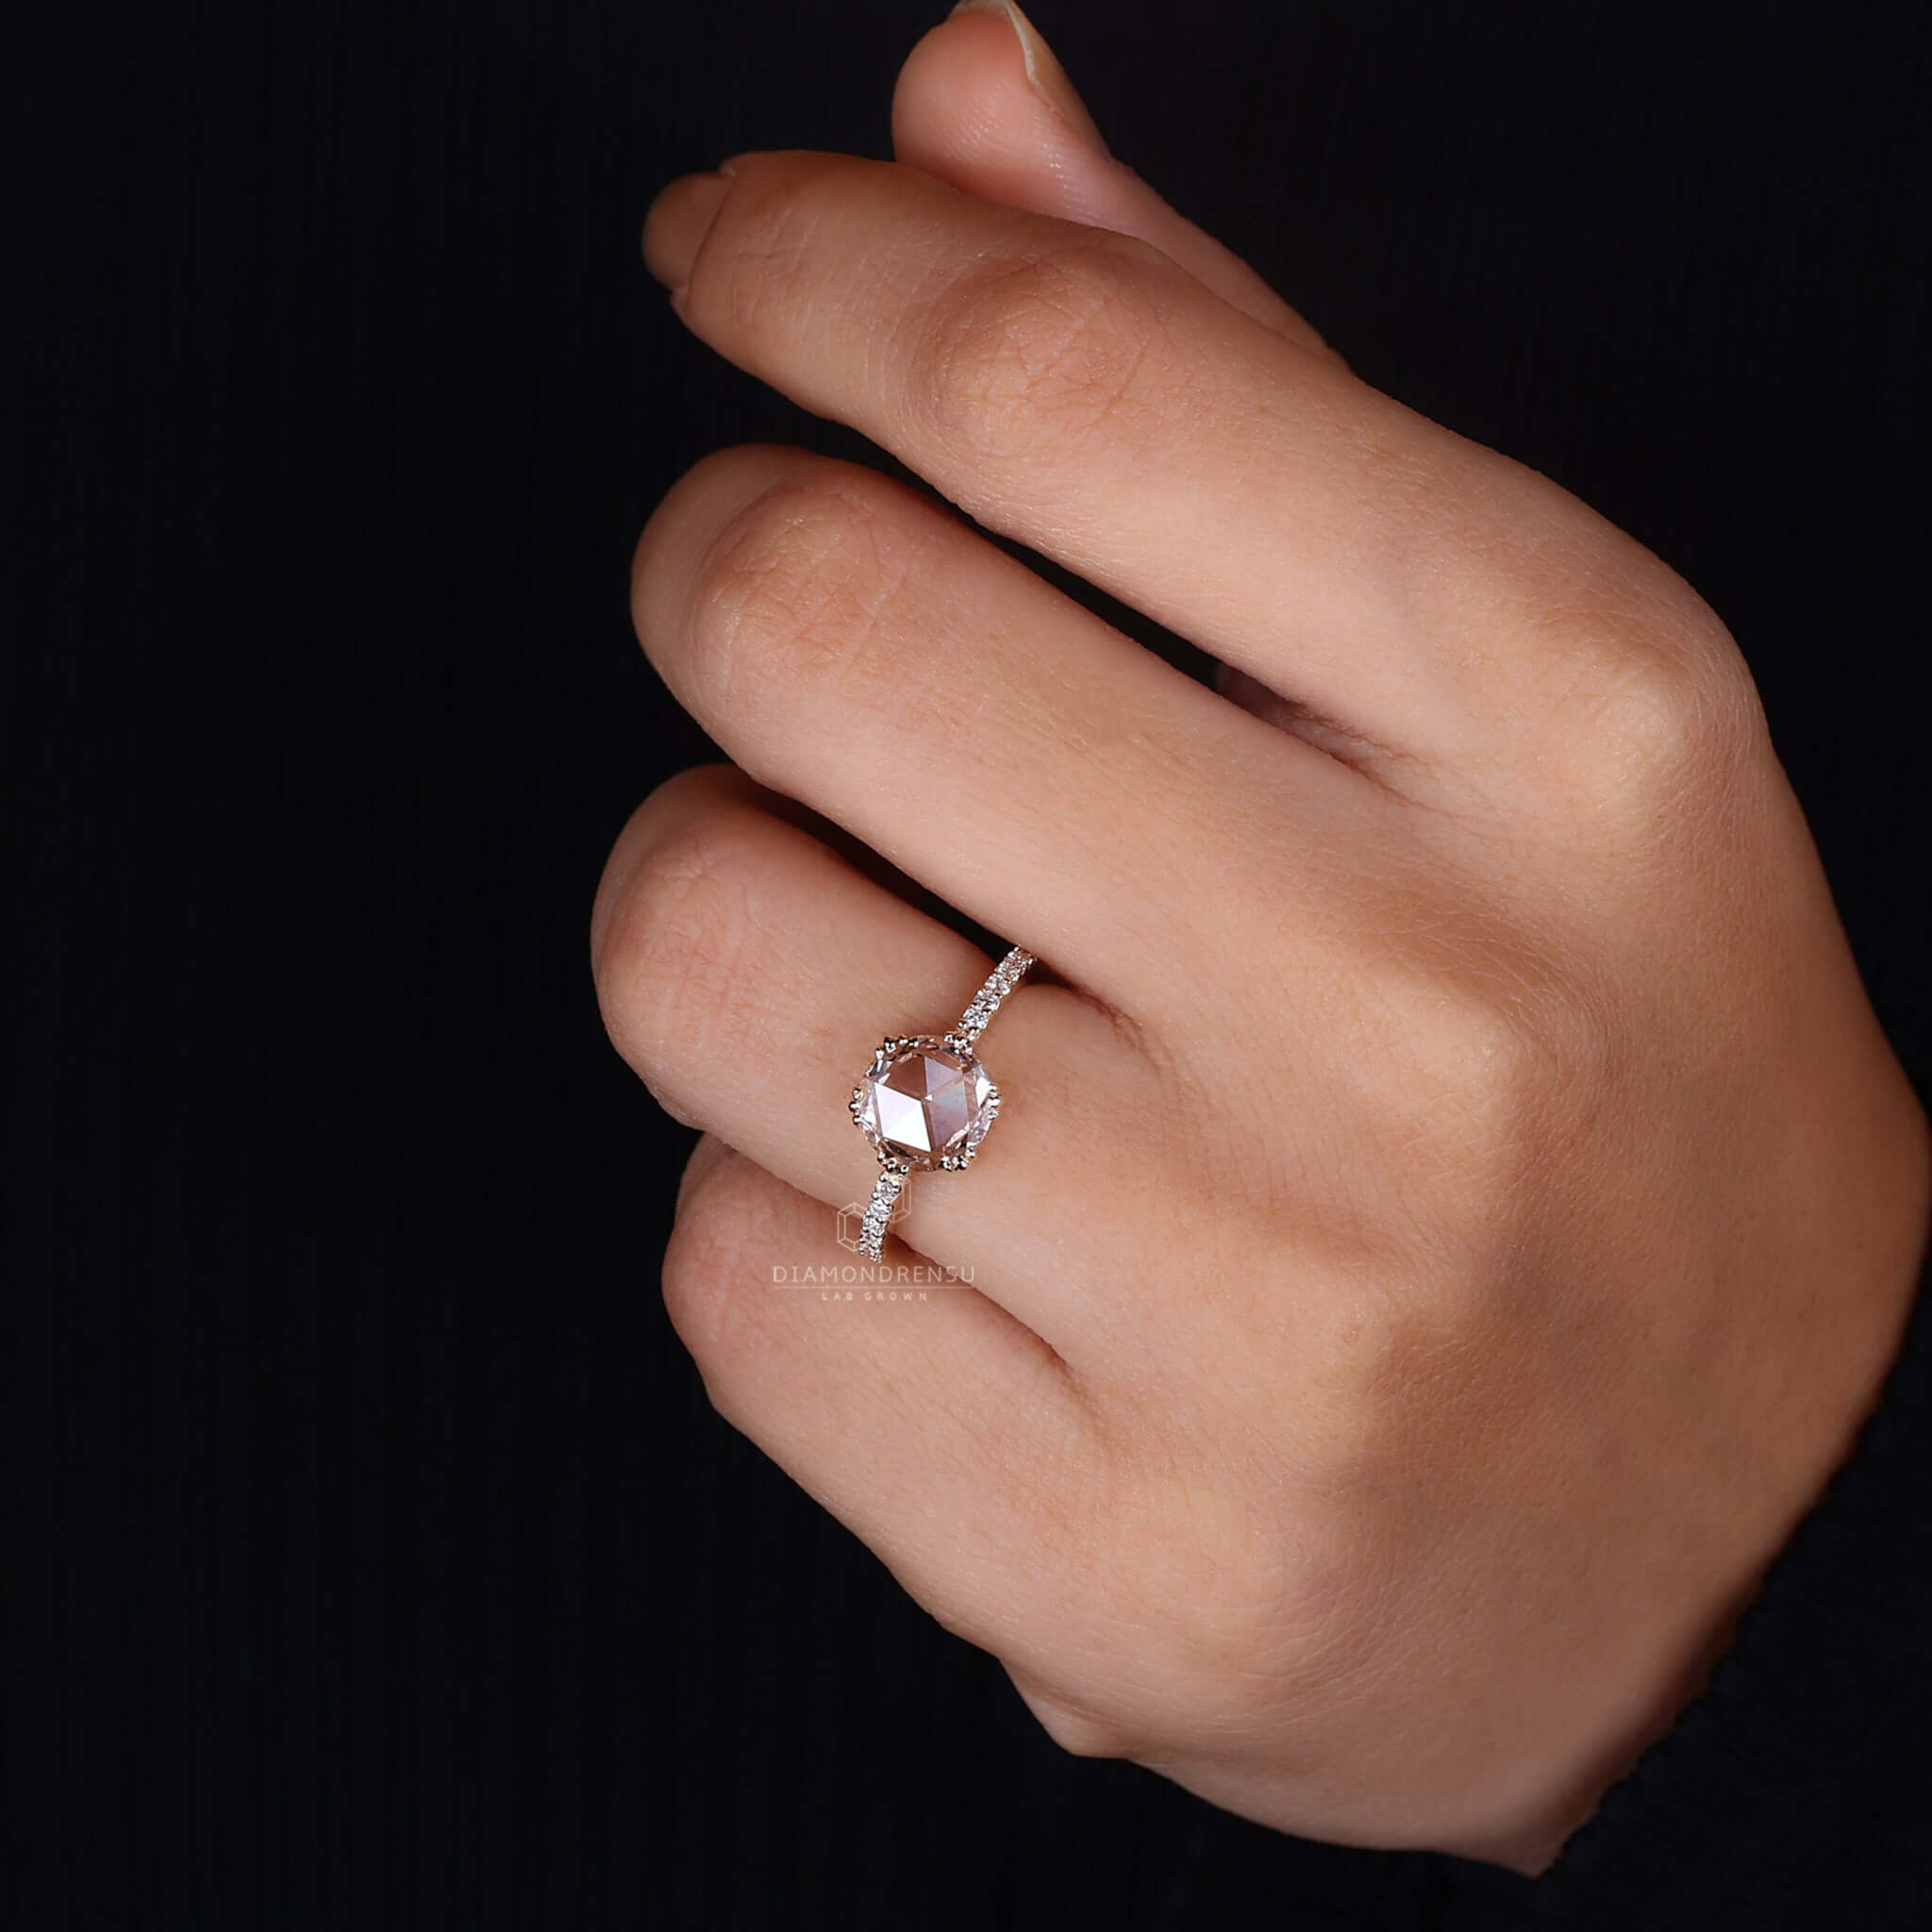 Rose cut ring showcased on a hand, a timeless and elegant choice